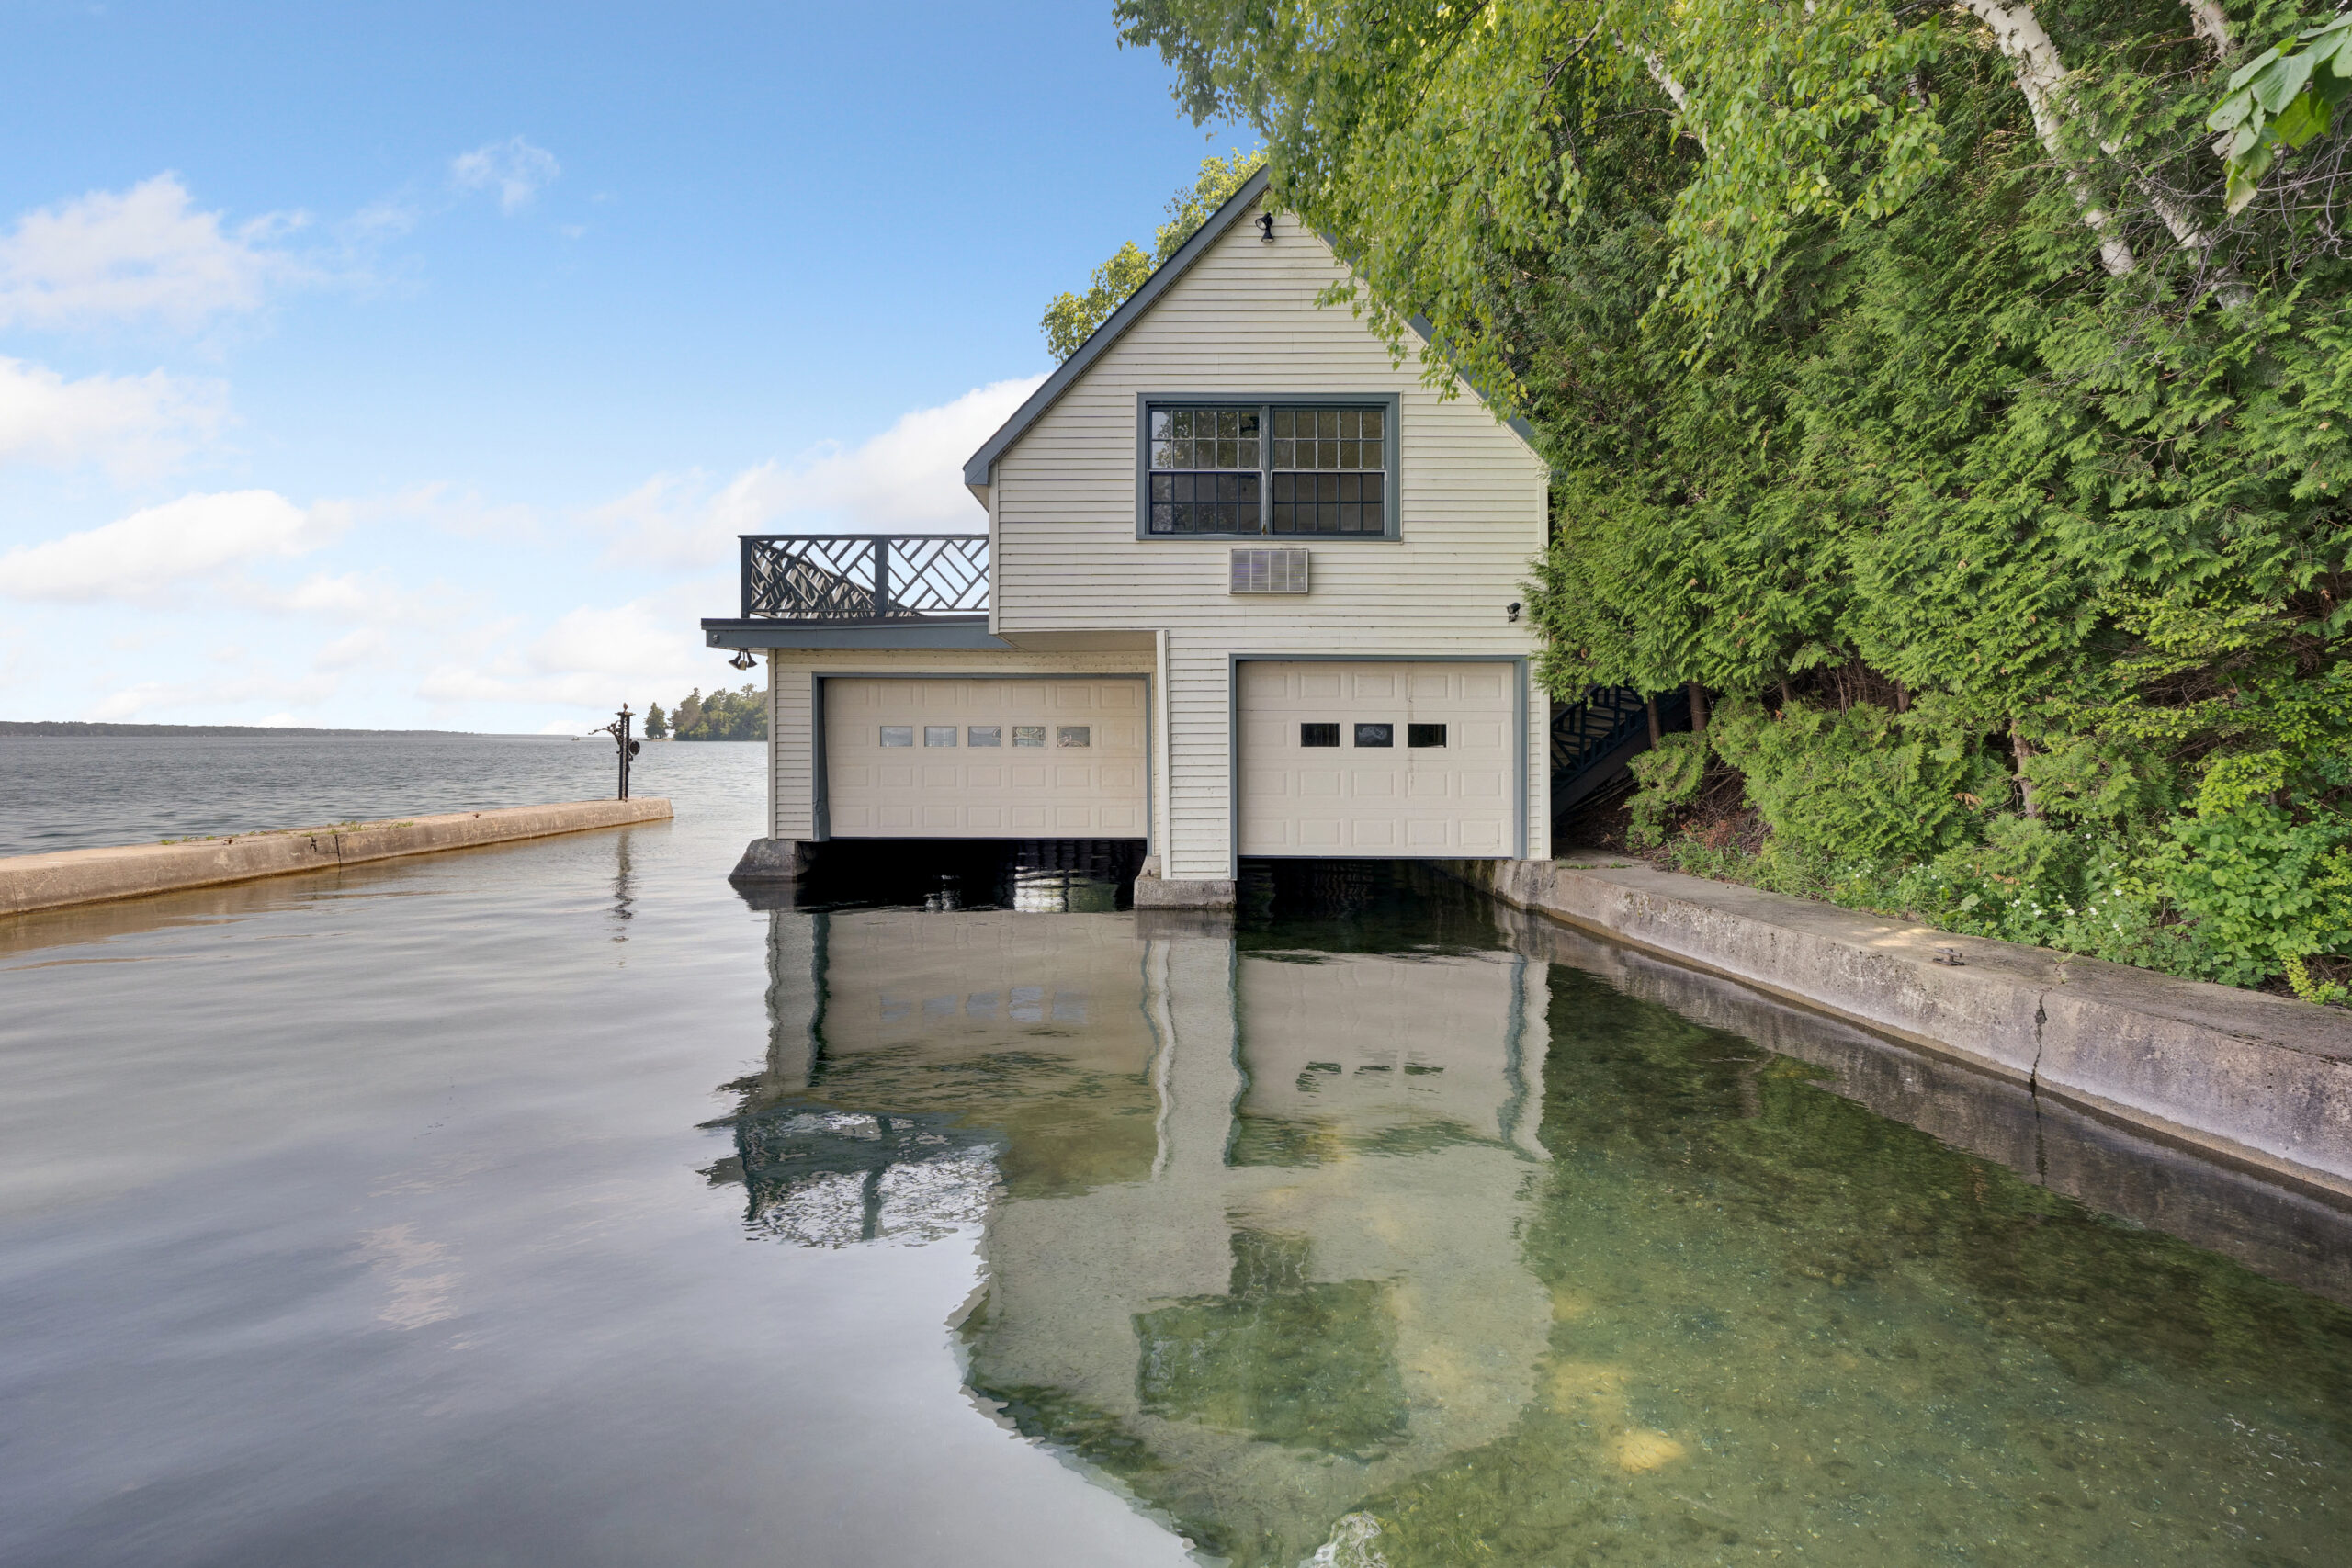 202 Boat House-200-221-4200x2800